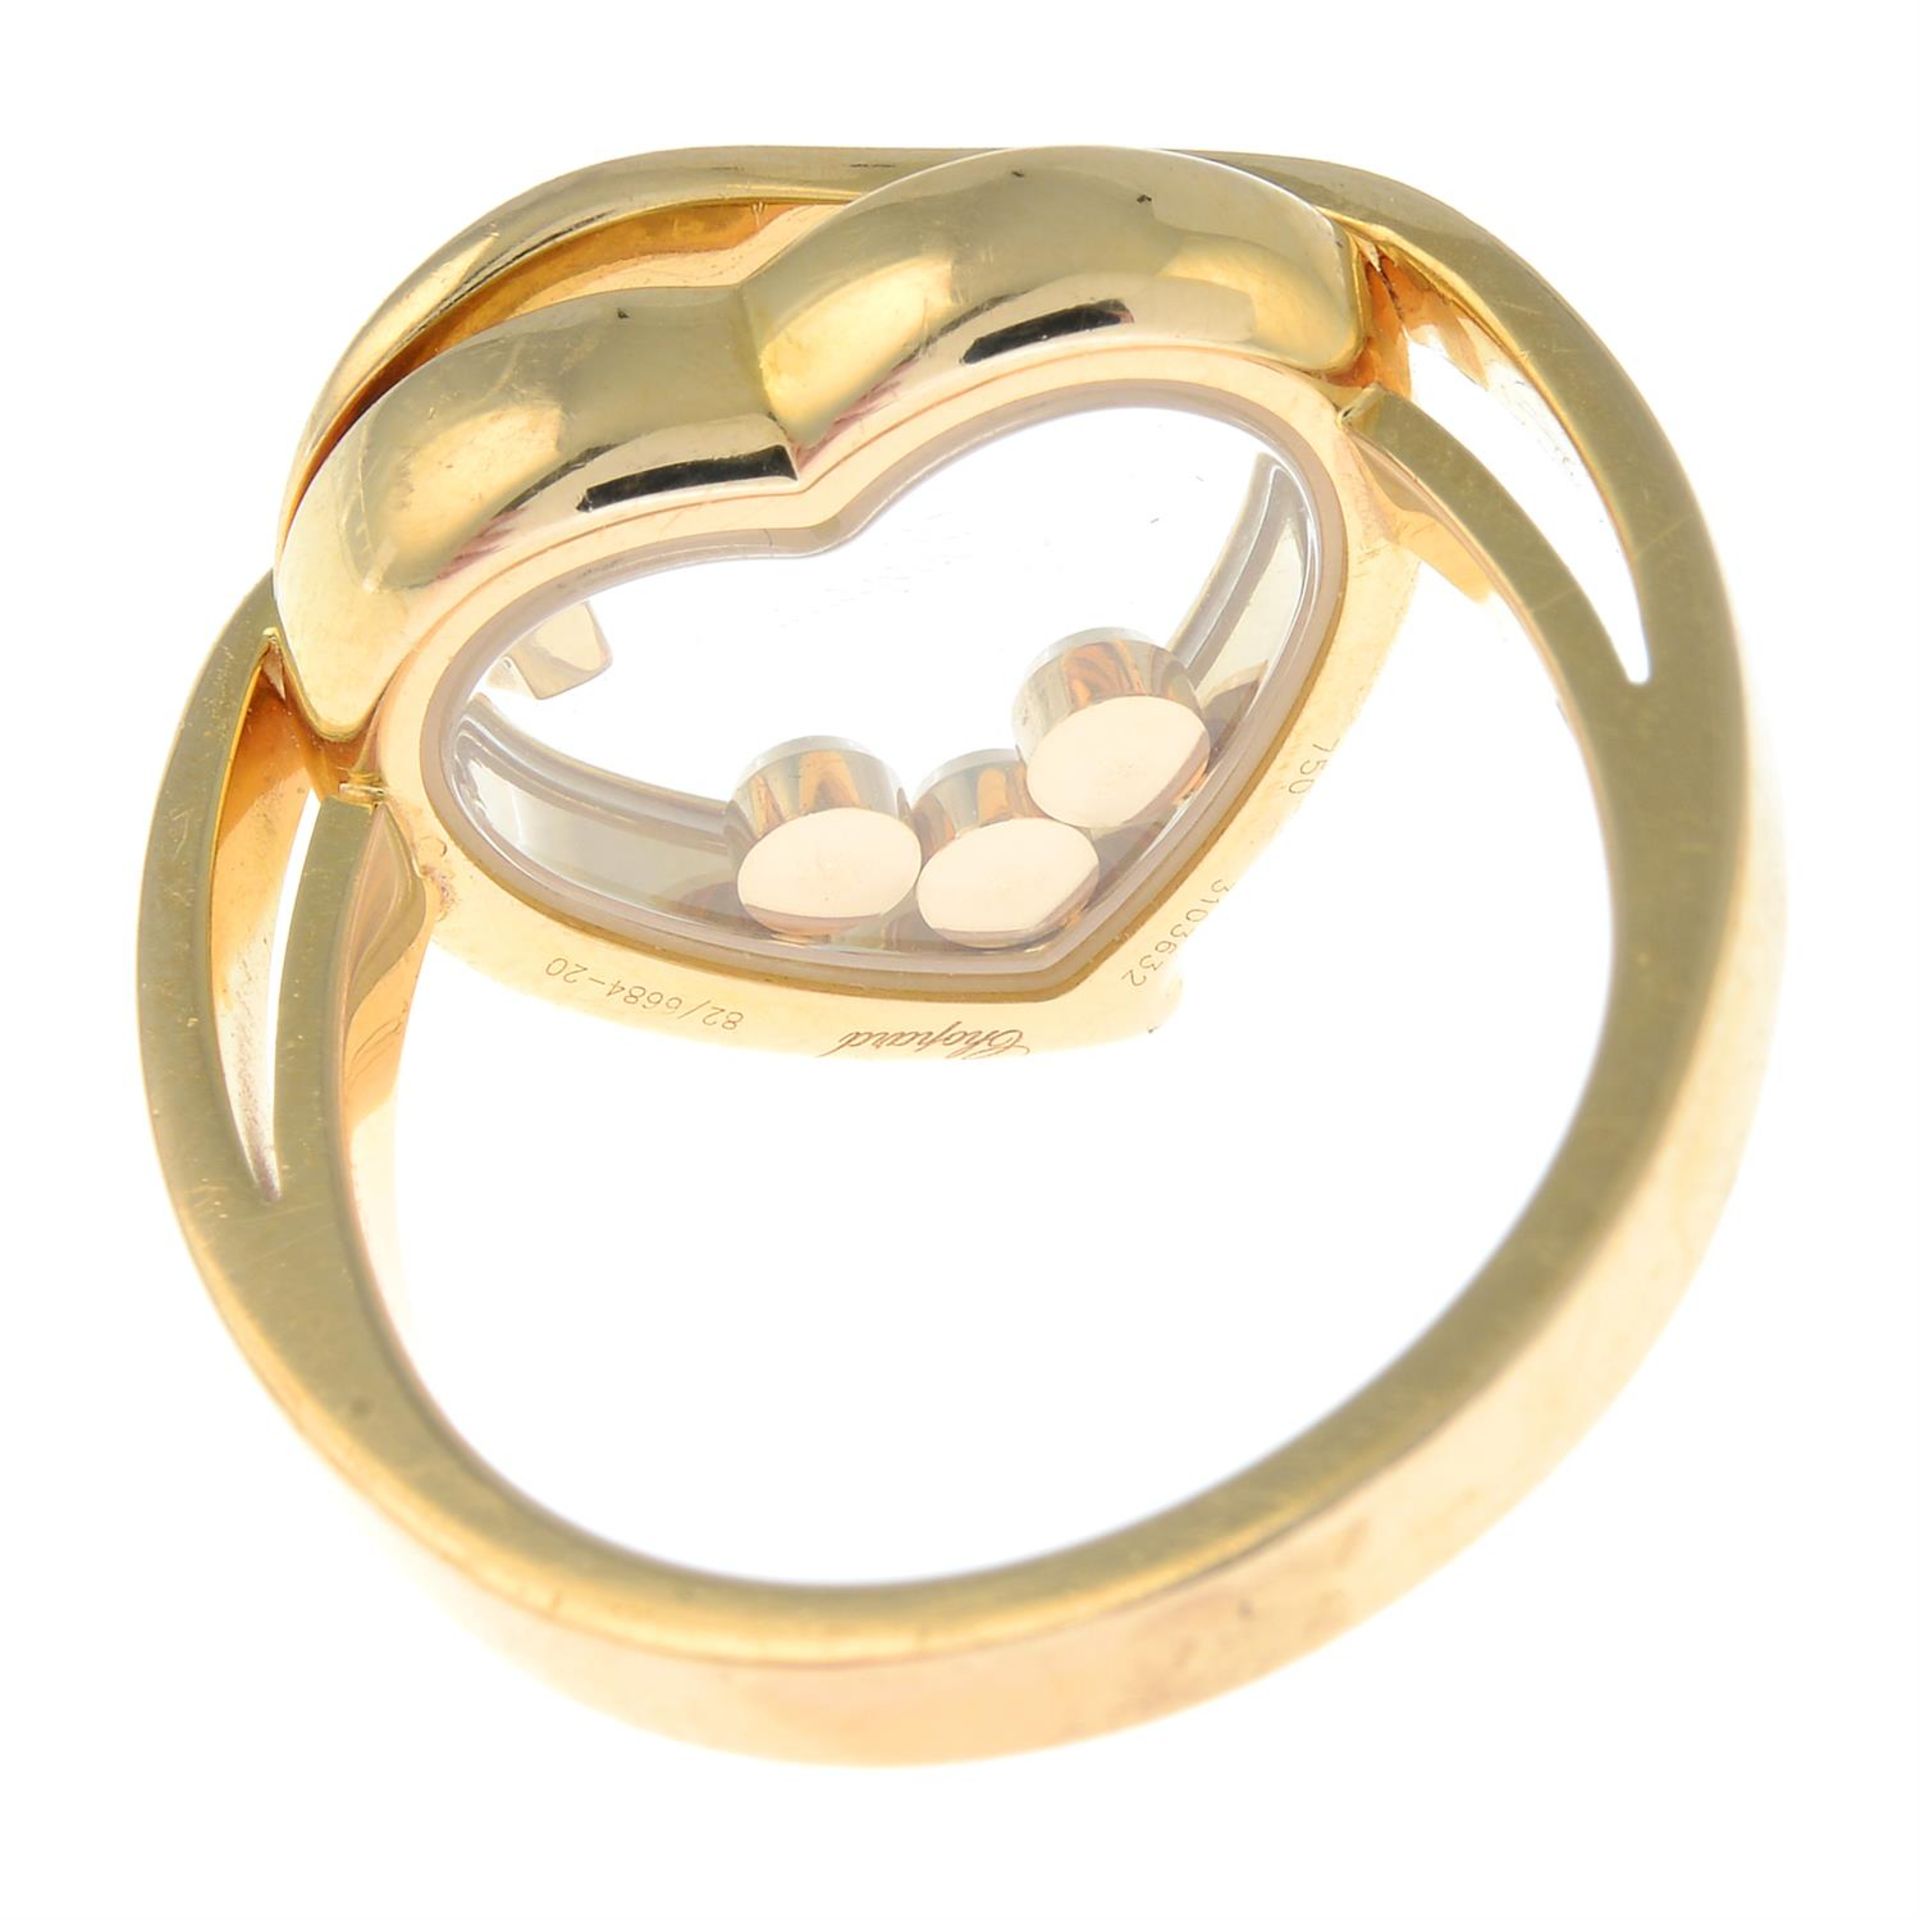 An 18ct gold 'Happy Diamonds' heart ring, by Chopard. - Image 4 of 5